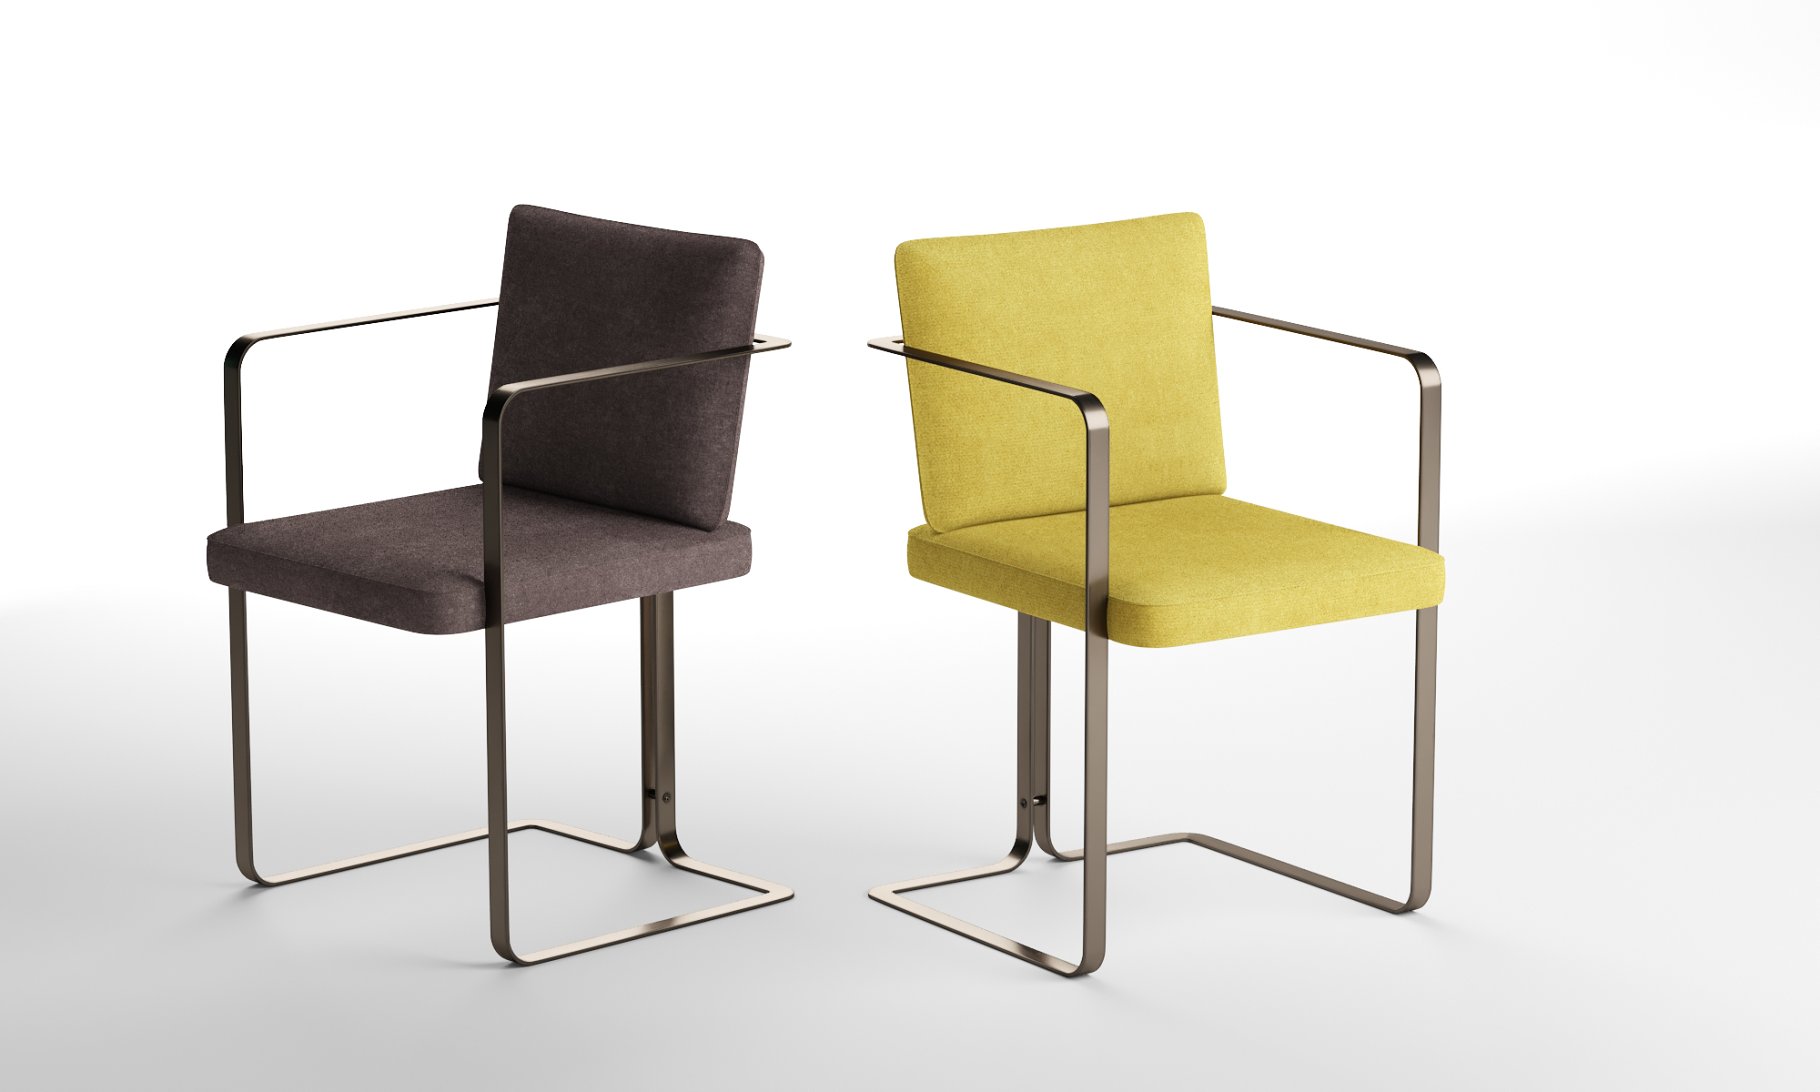 Rendering of a unique 3d model of an armchair in two colors